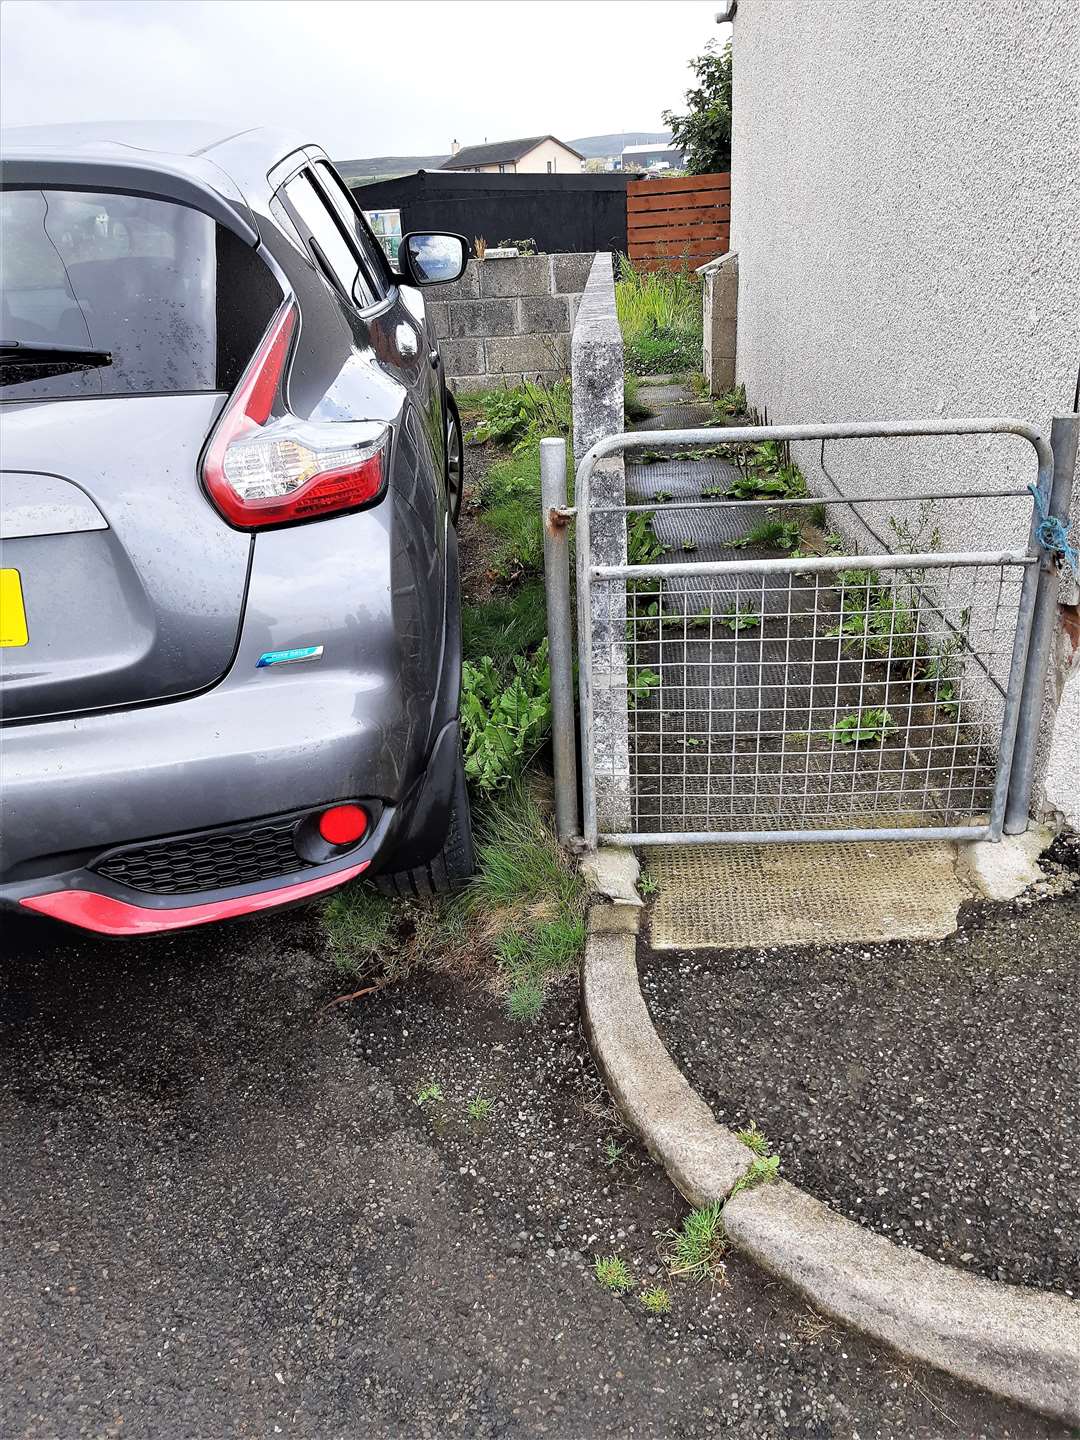 Ulbster resident Gary Clarke posted images showing the parking problems on his website.